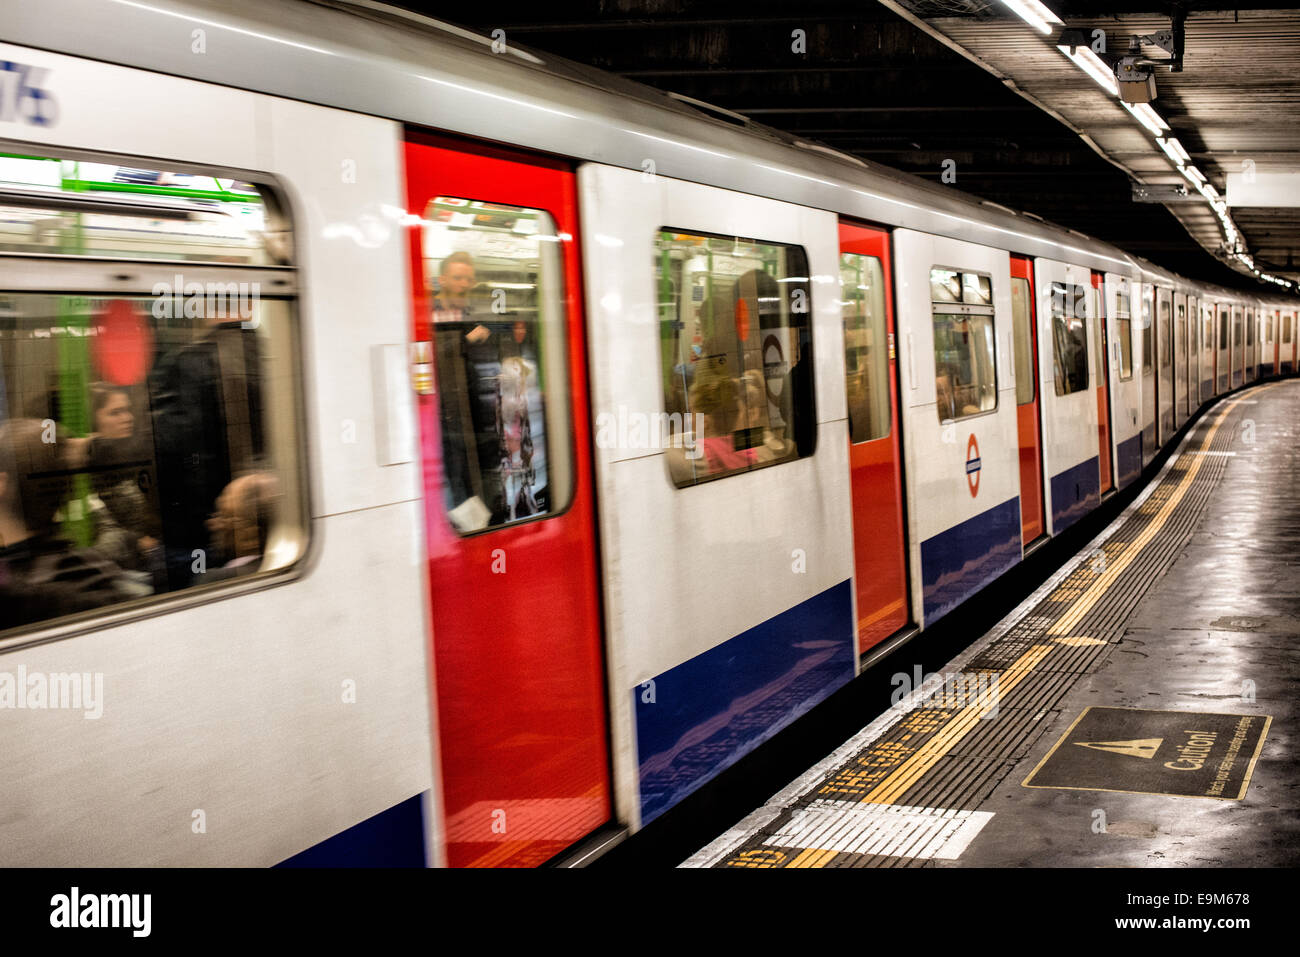 LONDON, UK - A London Underground train pulling out from the tube stop. Stock Photo